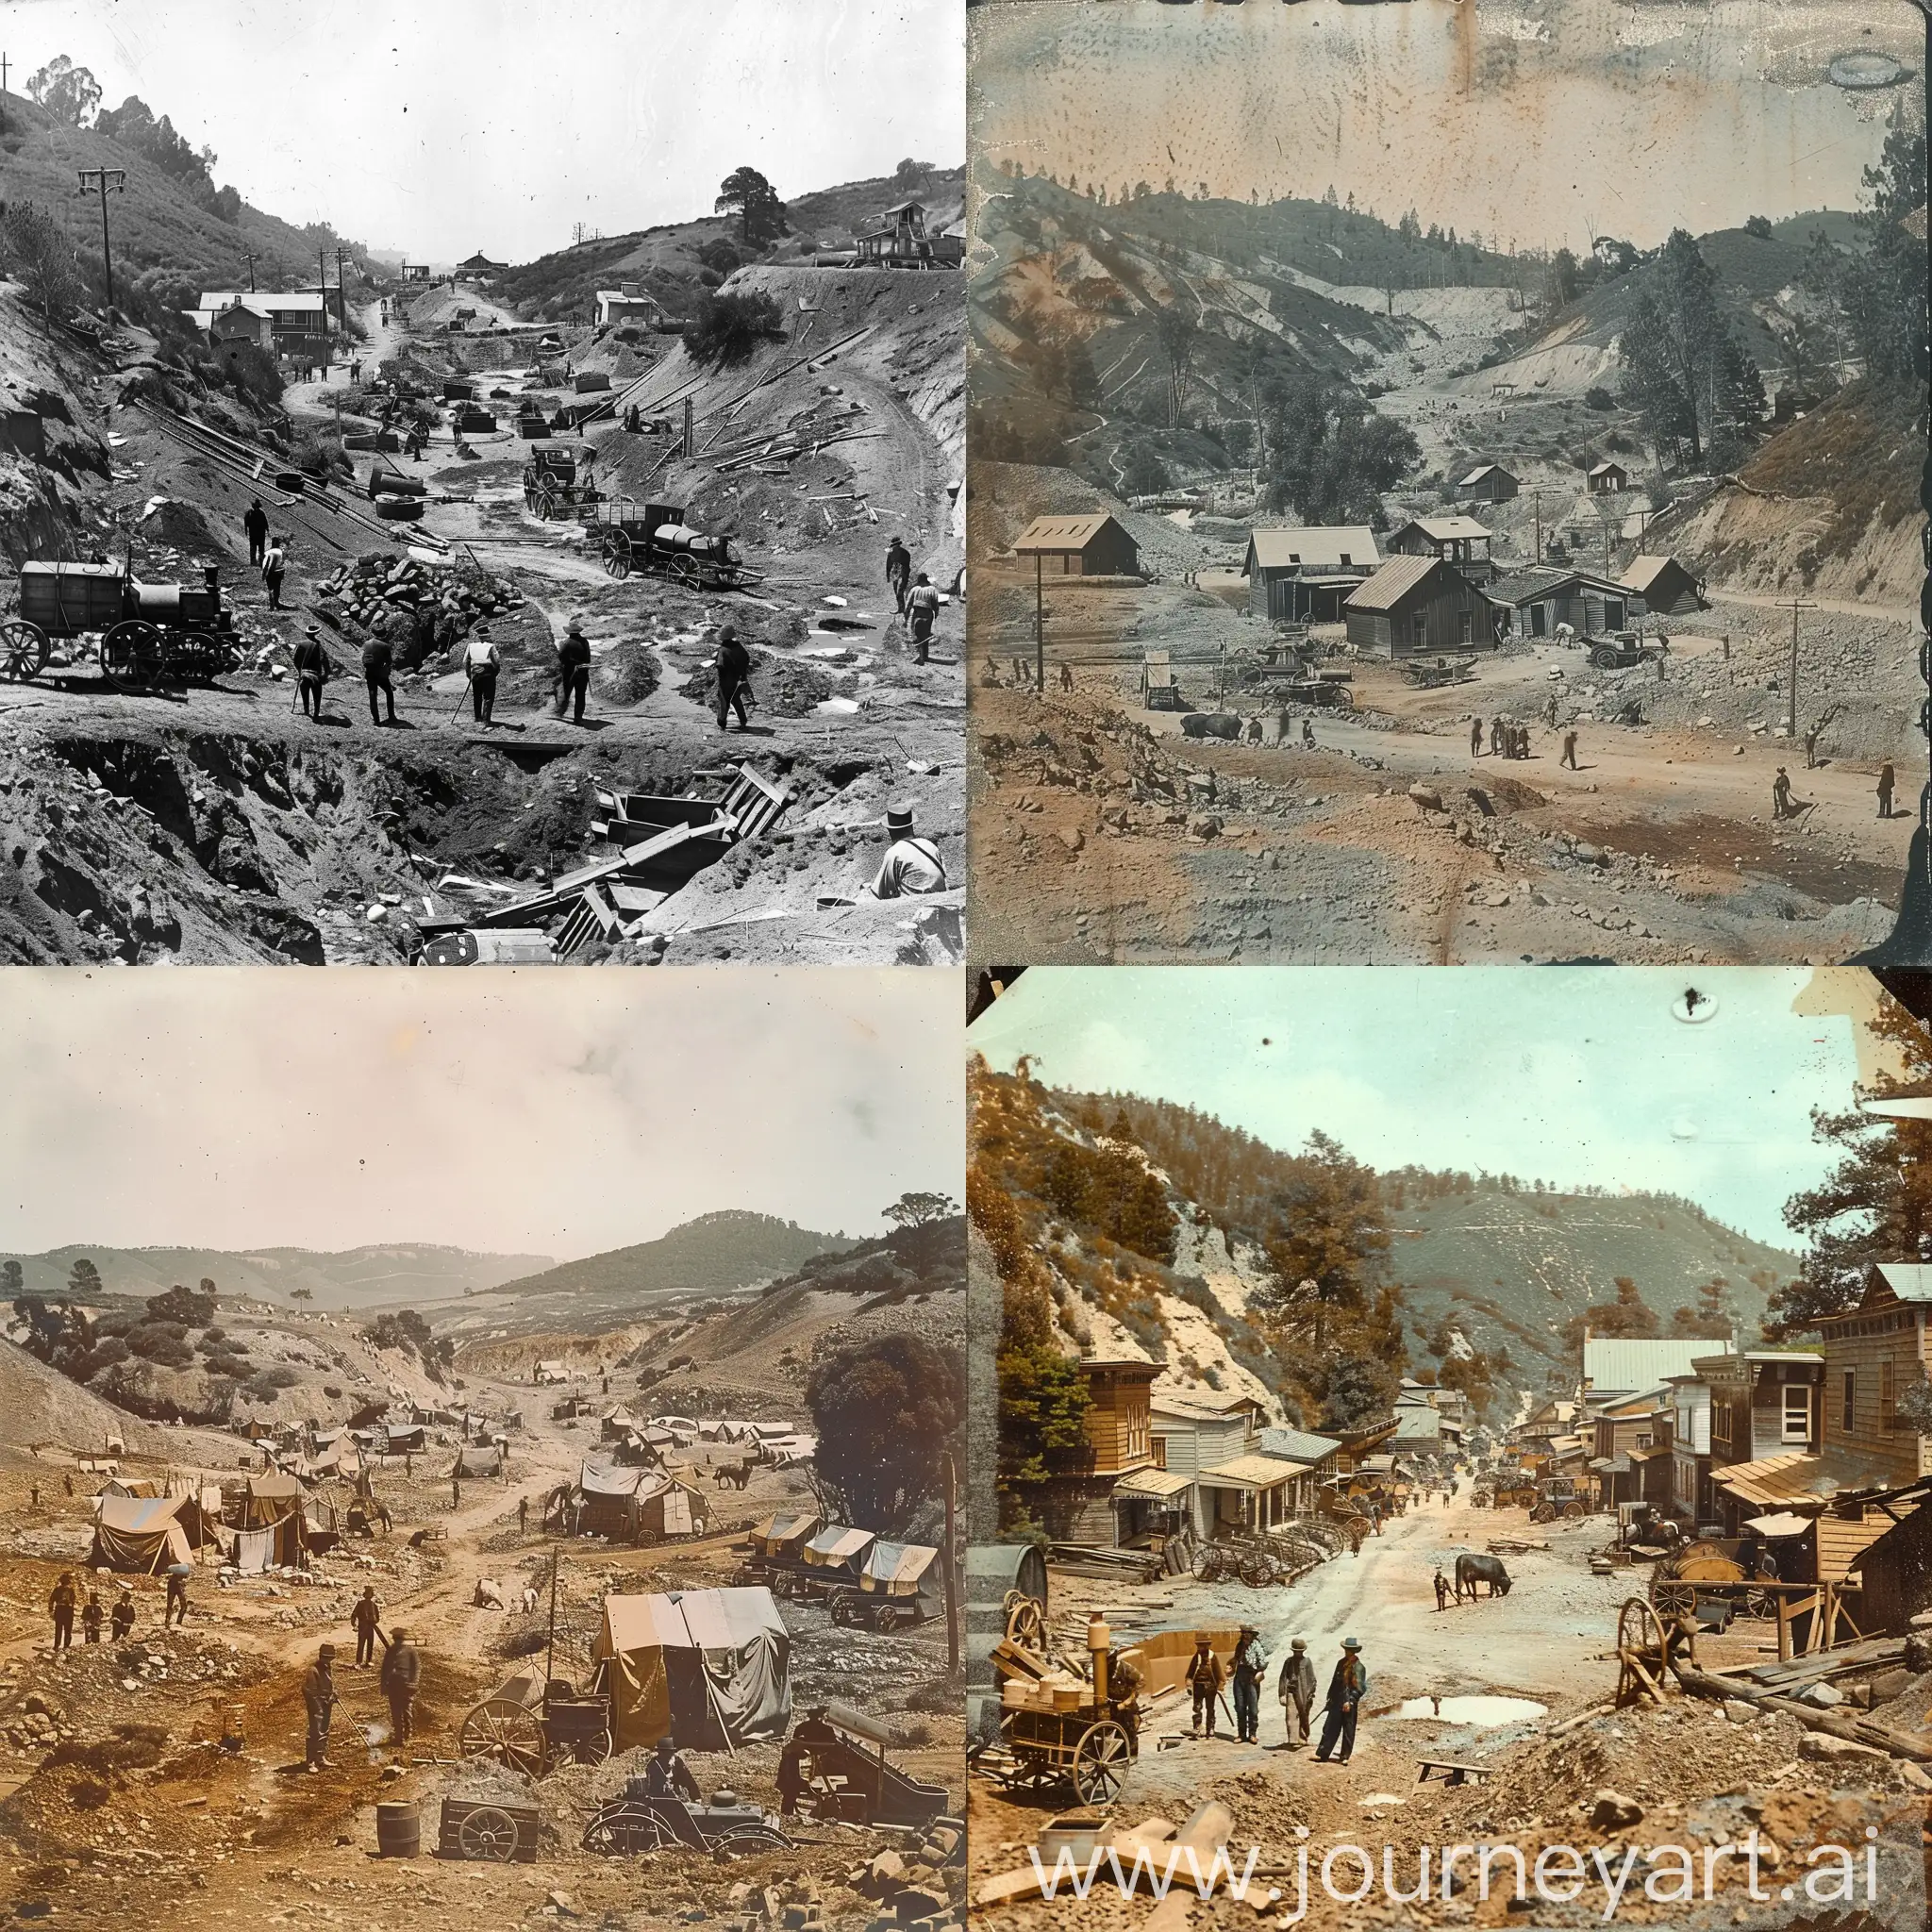 a historical photo of California during the gold rush